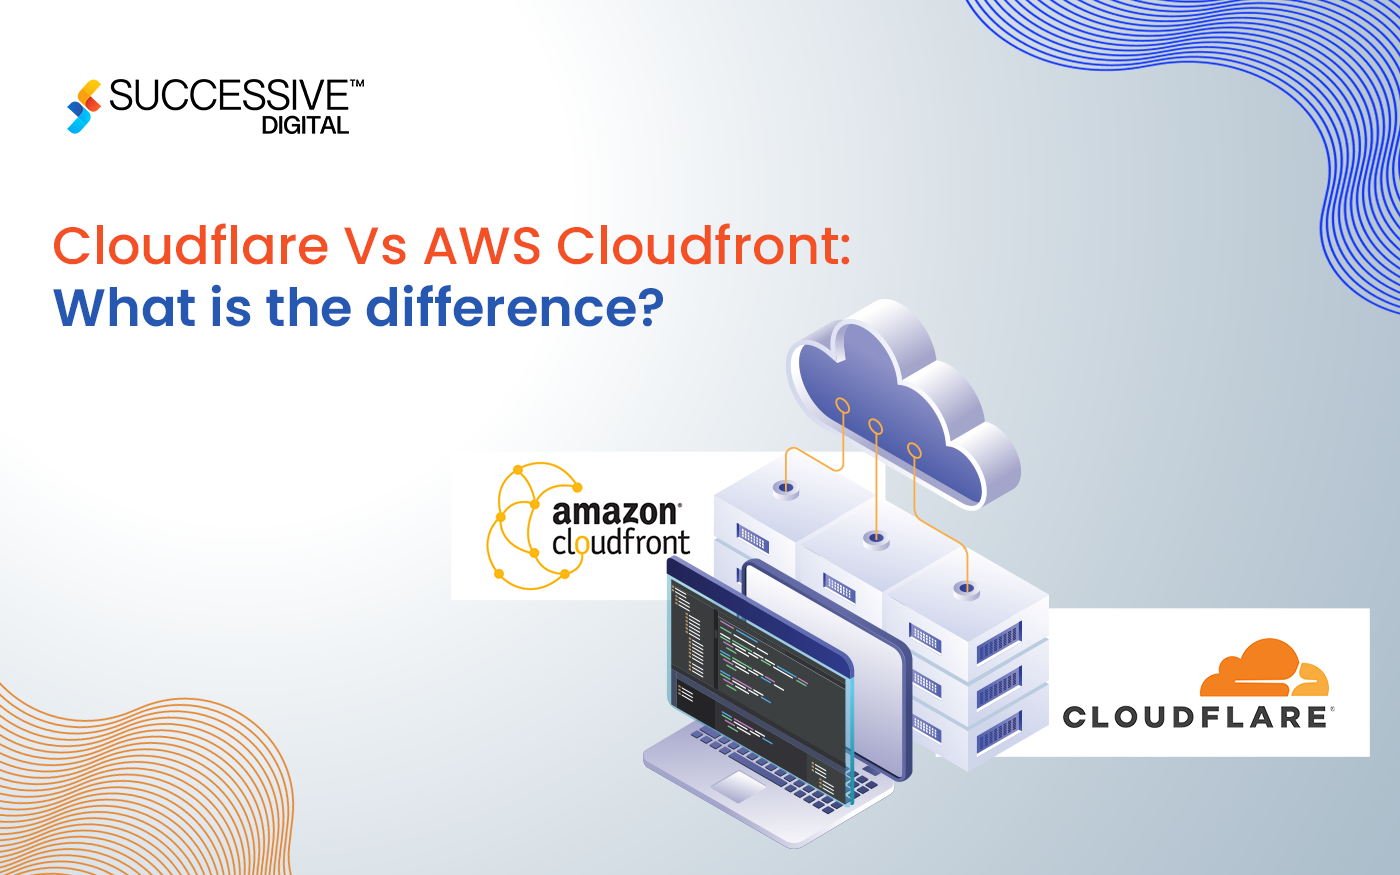 Cloudflare Vs AWS Cloudfront: What is the Difference?